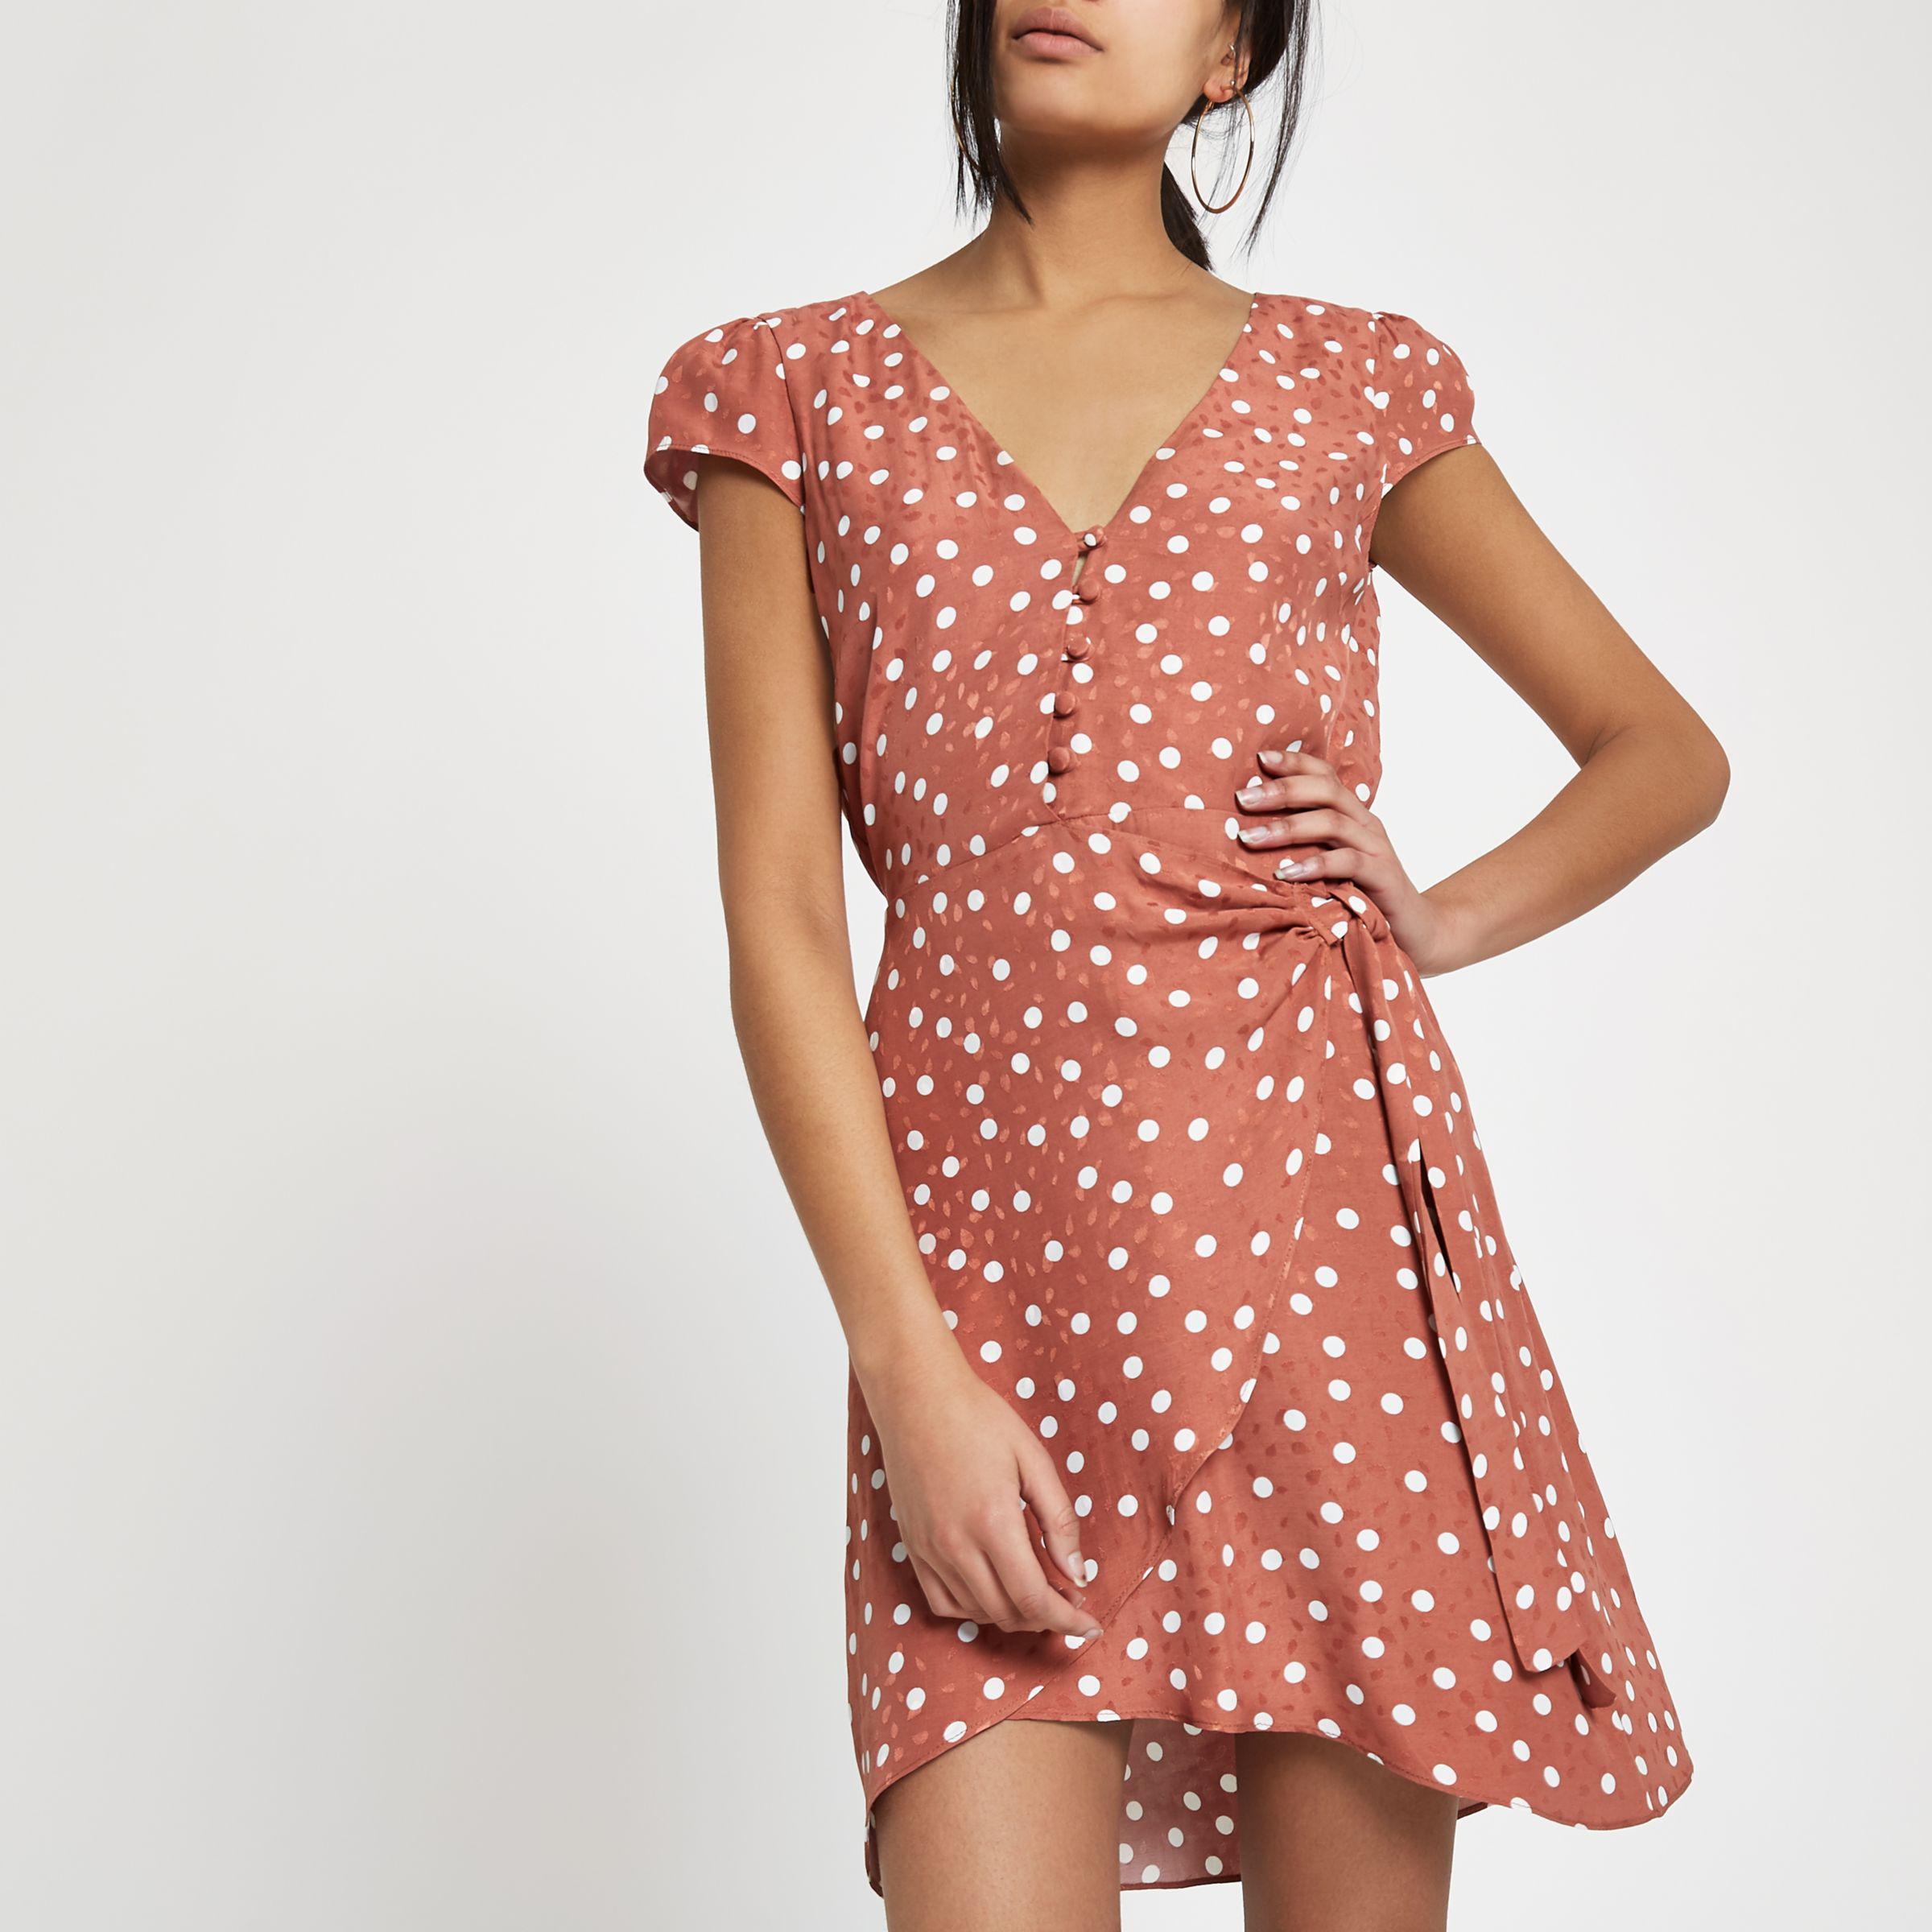 River Island Synthetic Polka Dot Cap Sleeve Wrap Dress in Brown | Lyst  Canada